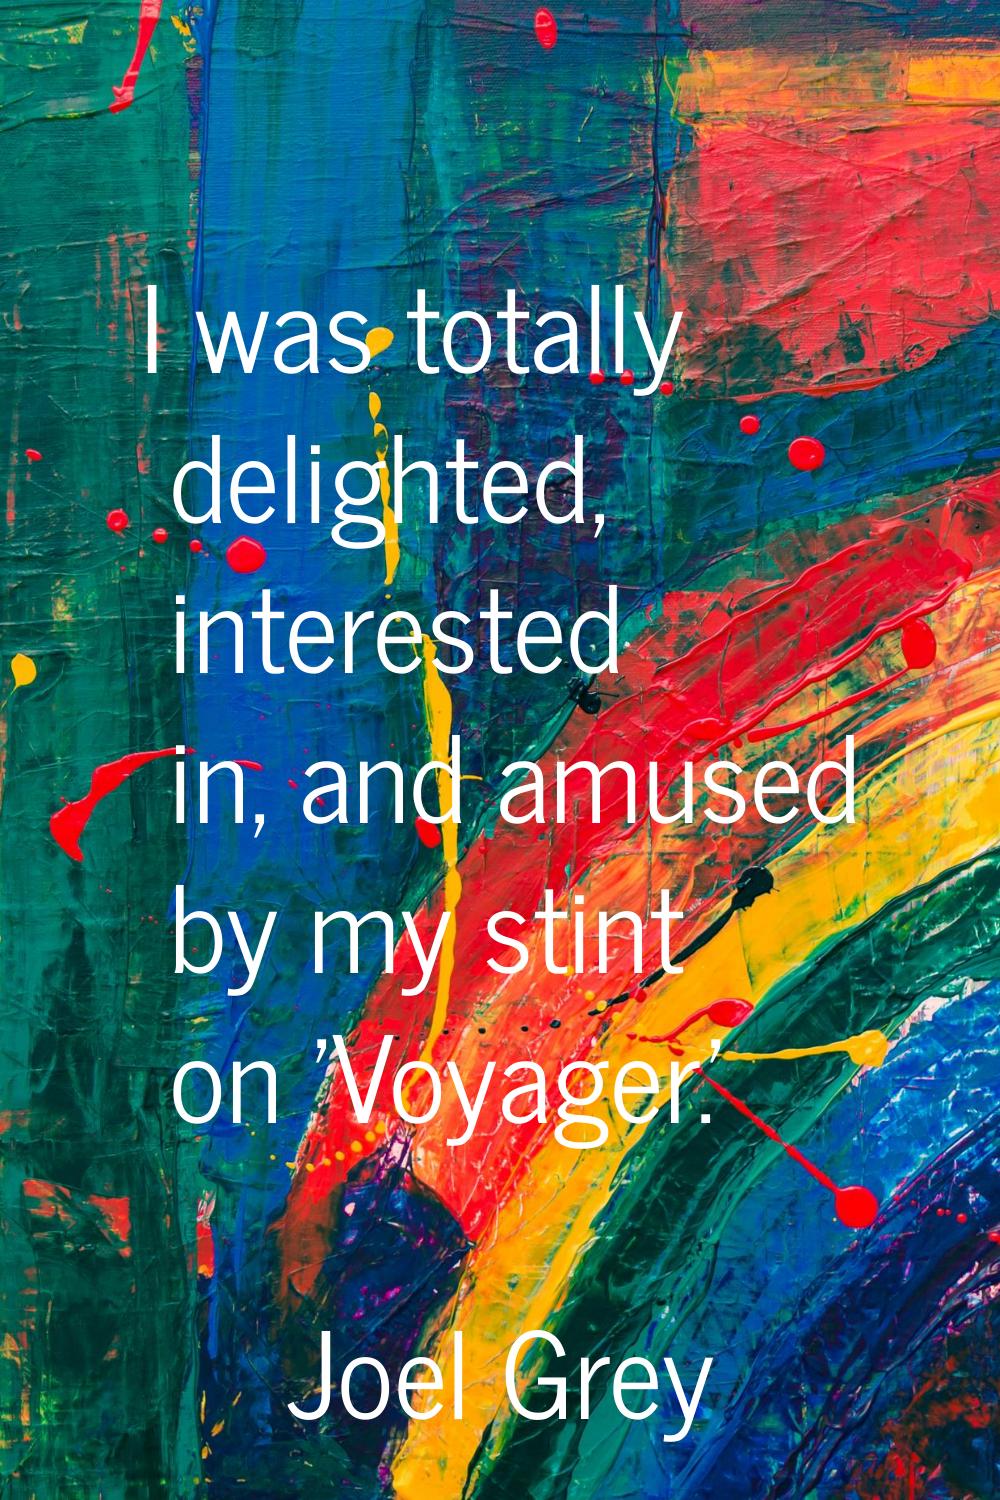 I was totally delighted, interested in, and amused by my stint on 'Voyager.'